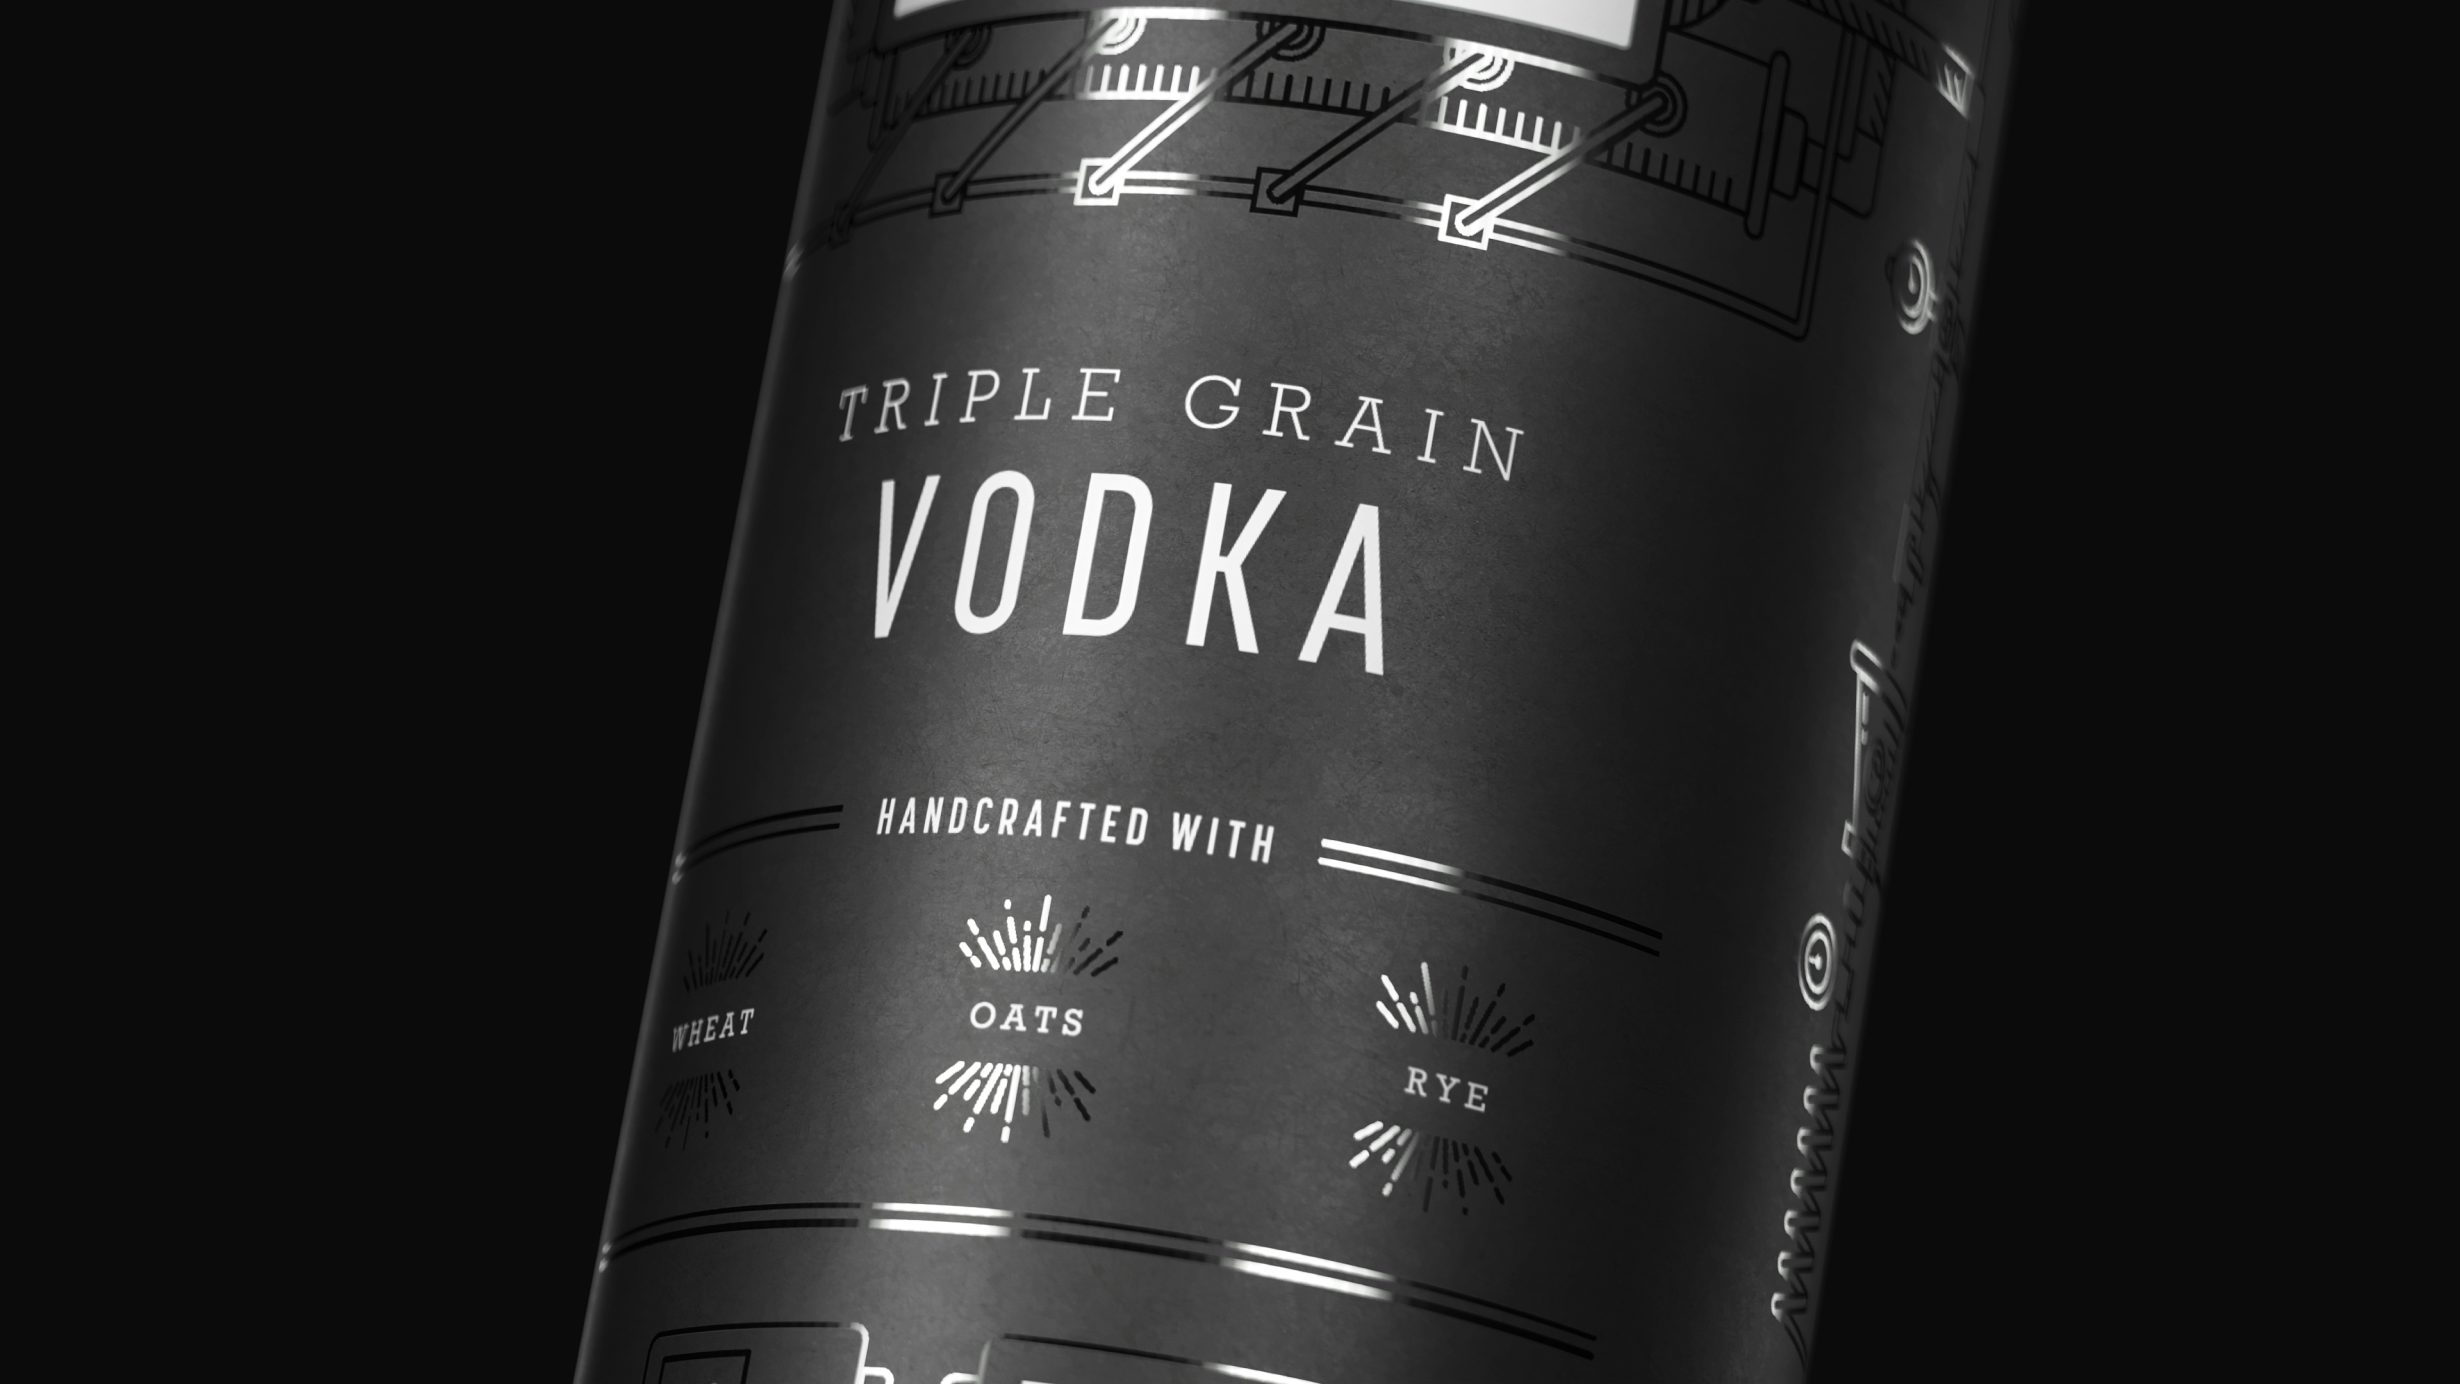 Black Triple Grain Vodka label rotating with light shining off the label, exposing reflecting ink on label details